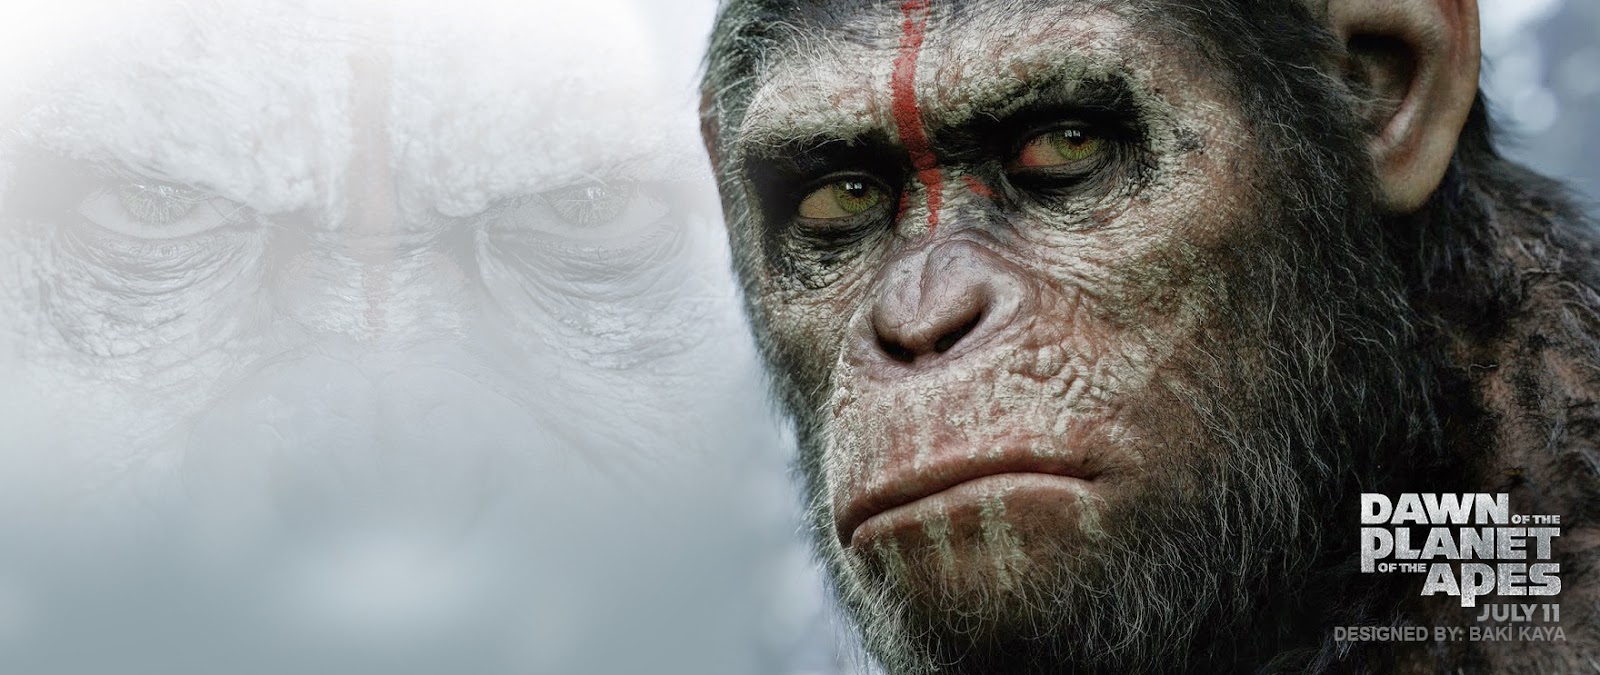 Watch Dawn of the Planet of the Apes Movie Online Free